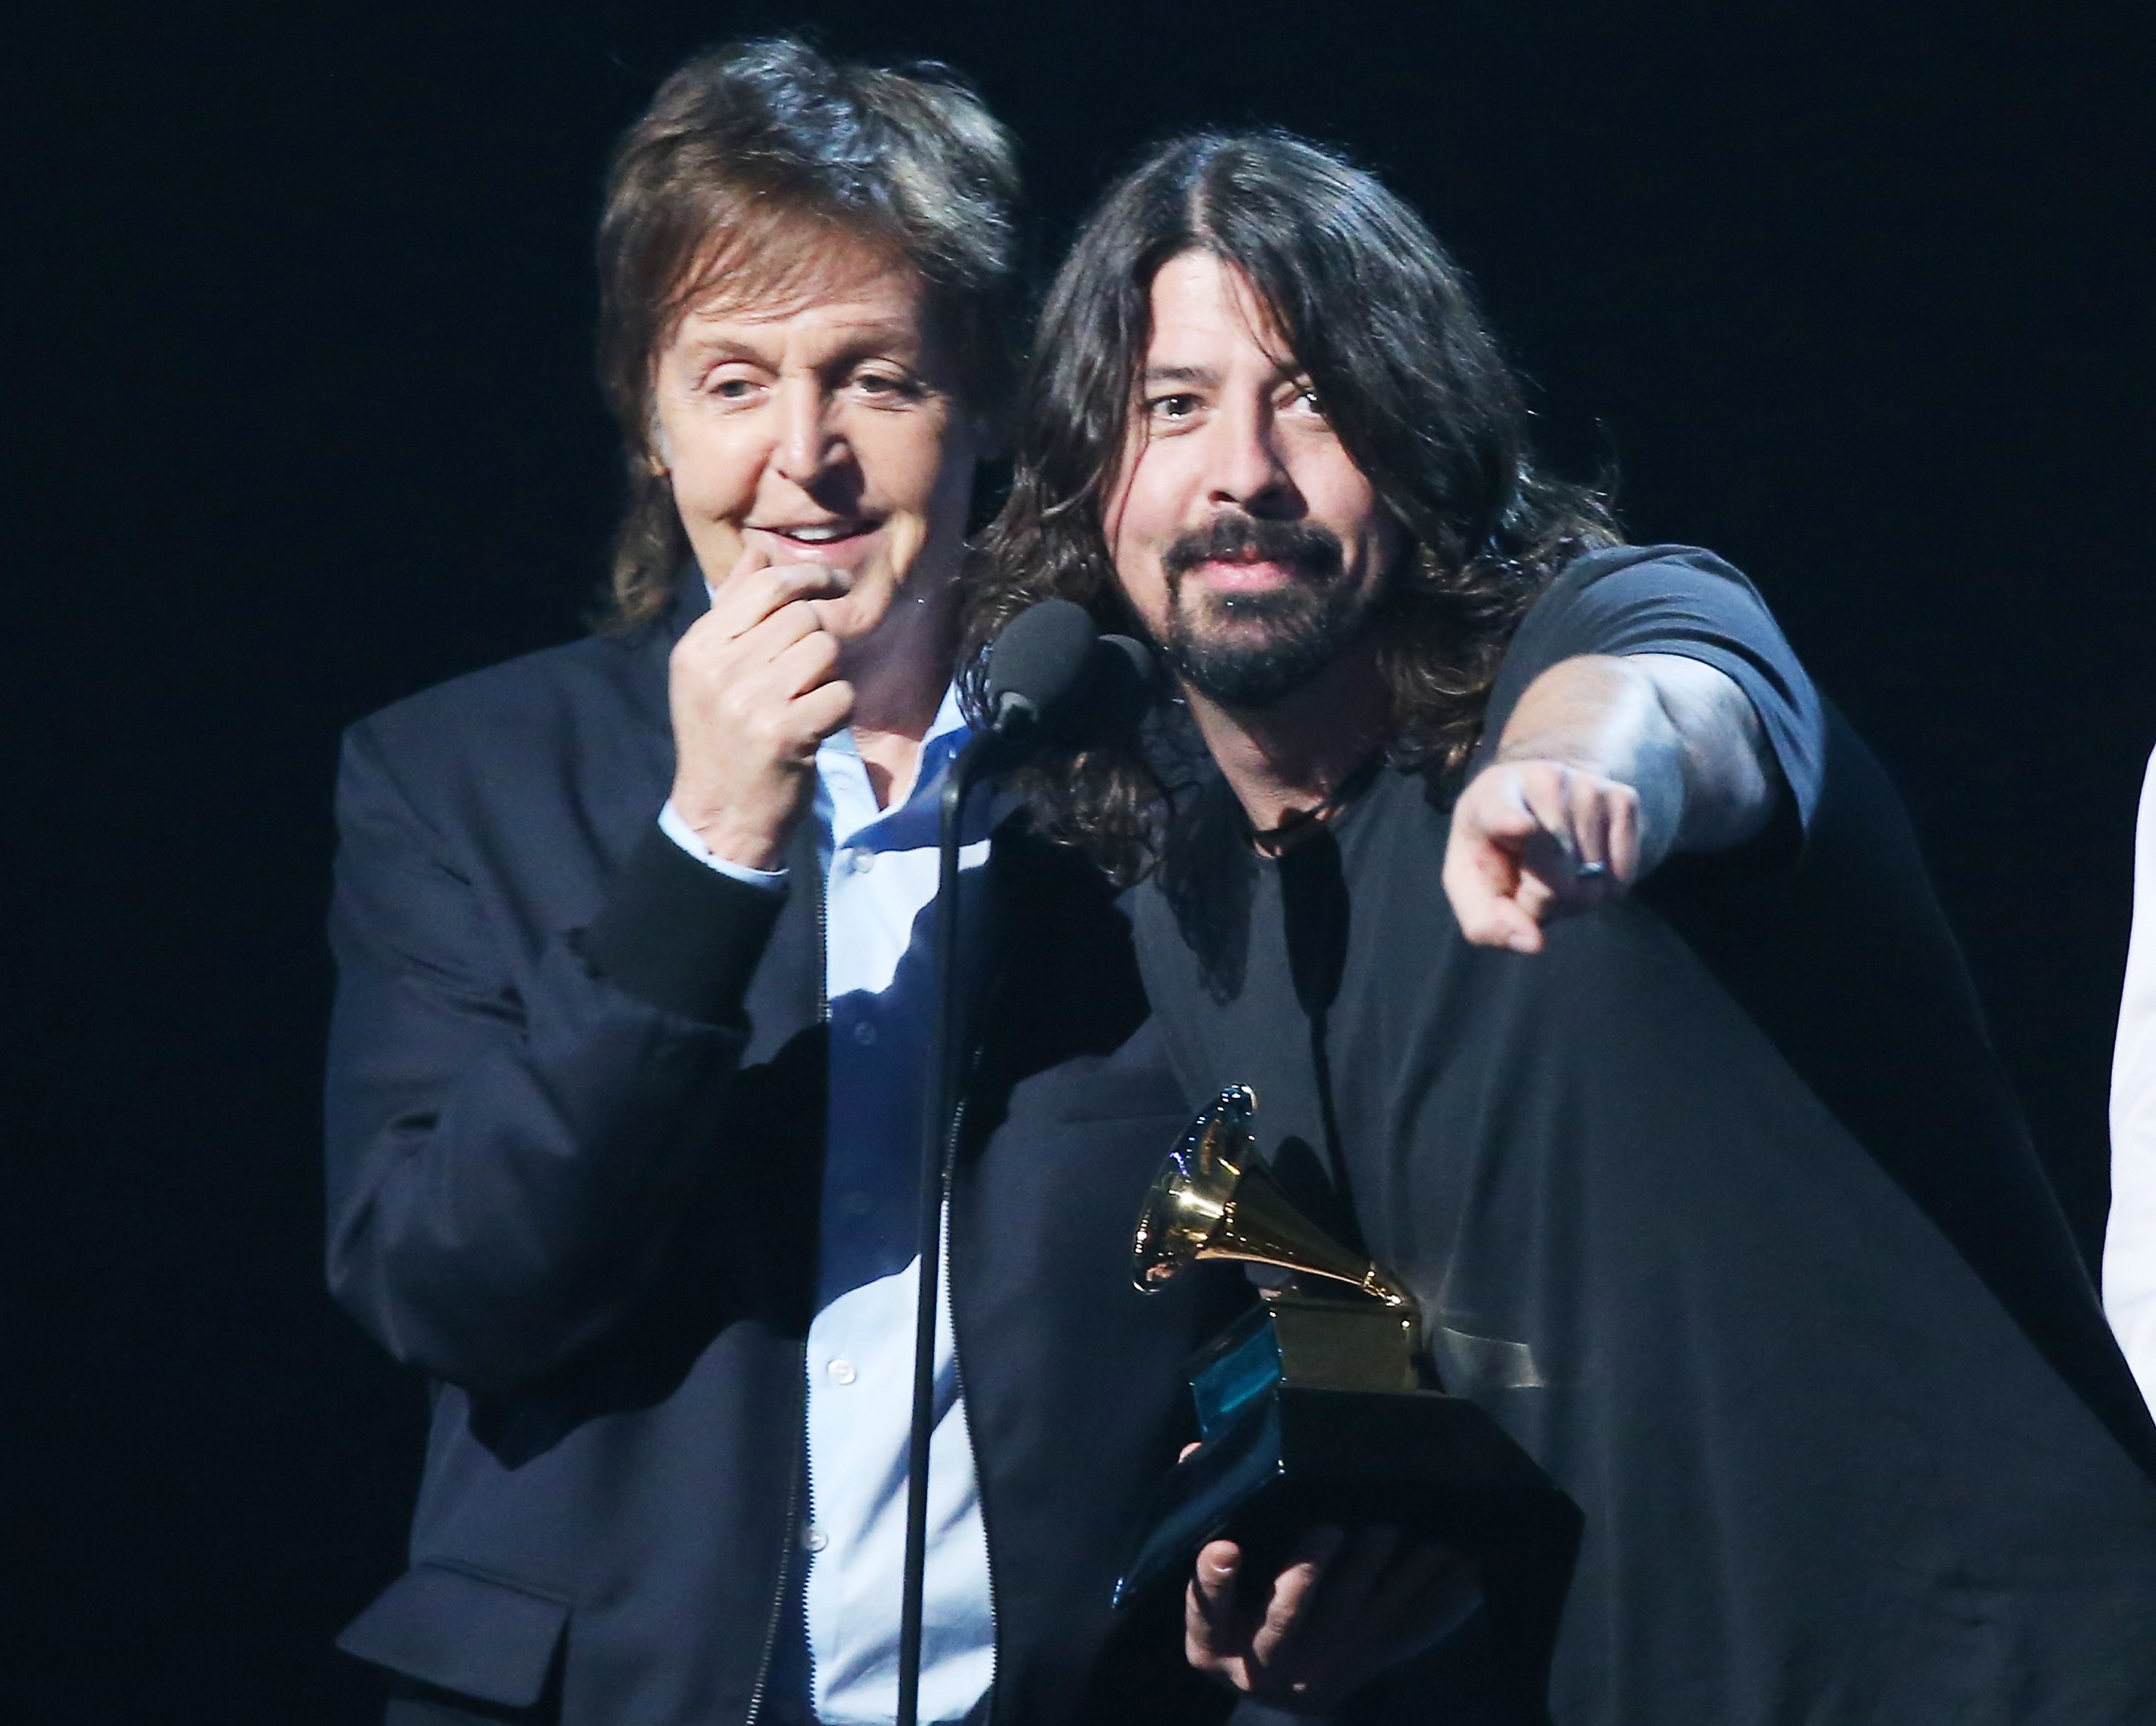 Paul McCartney and Dave Grohl at a microphone